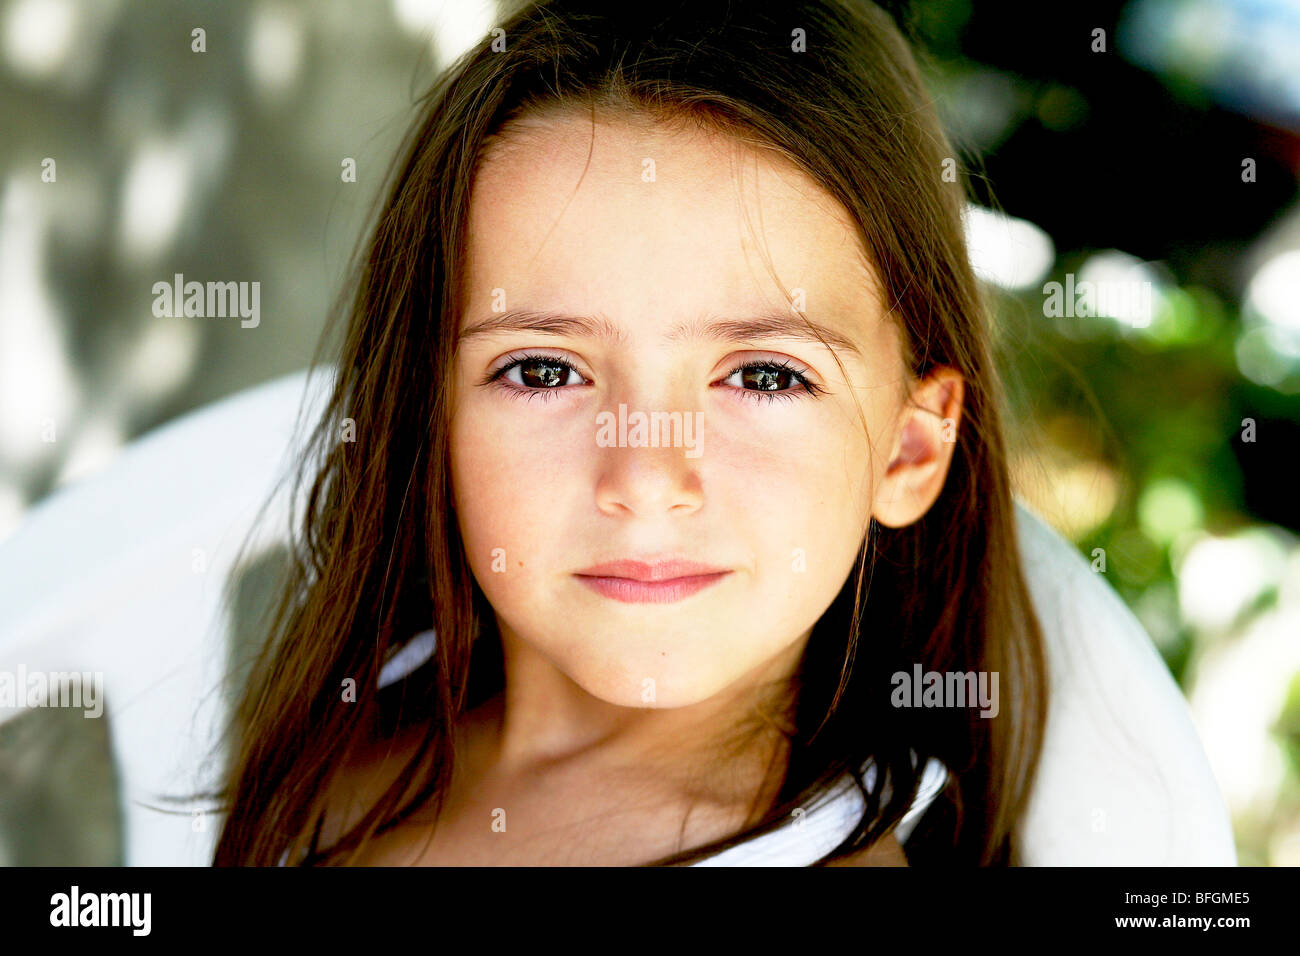 Close-up of young girl with long hair on chair, Limni, Evia Island, Greece Stock Photo